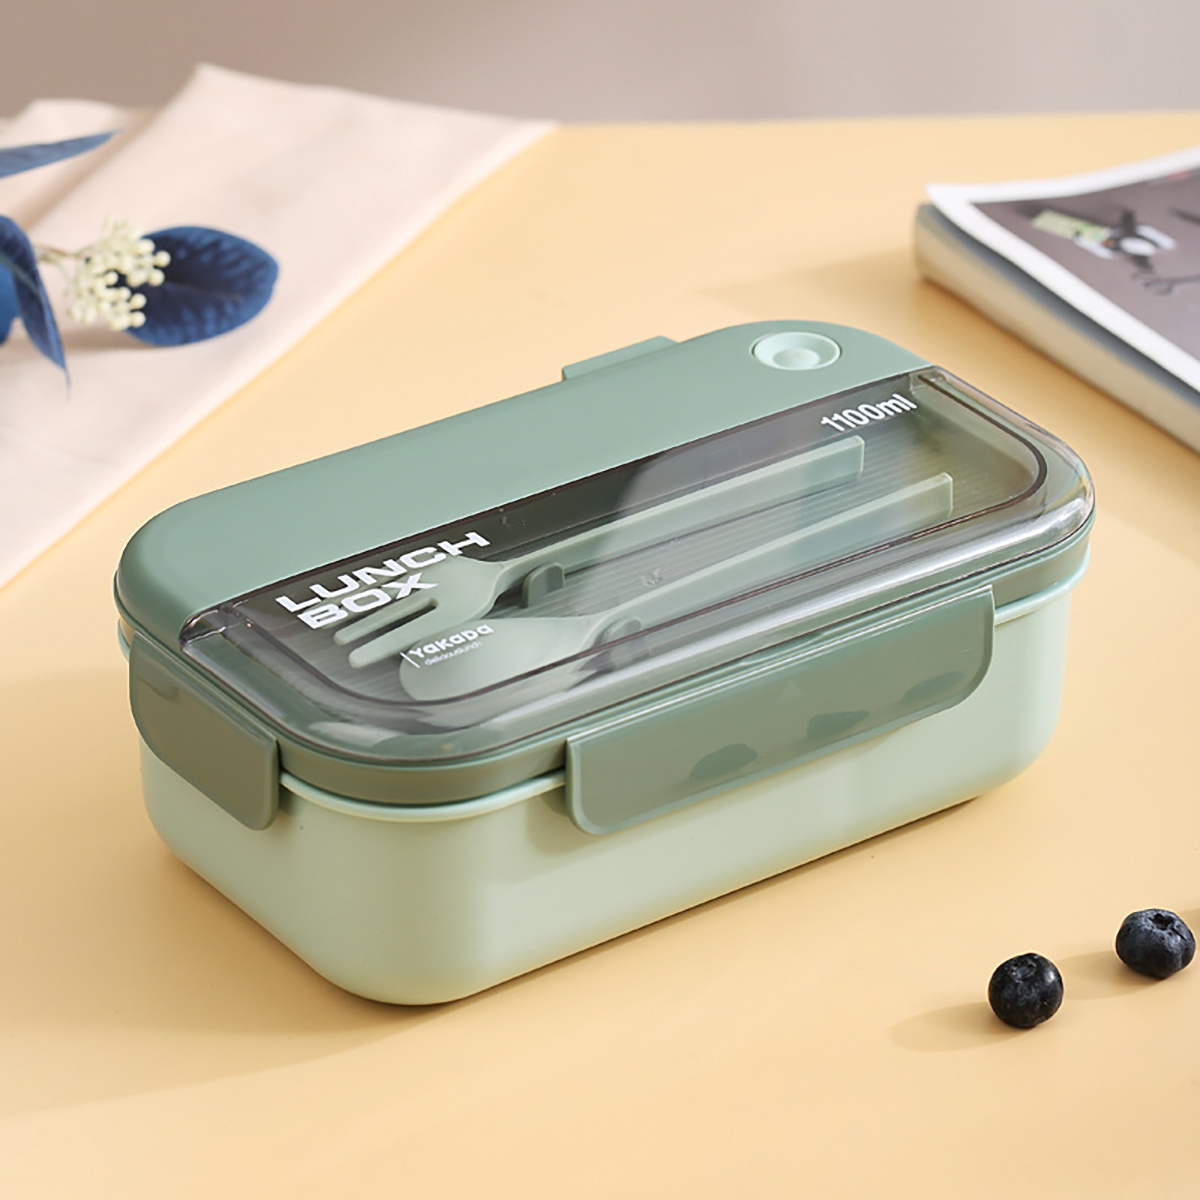 Eco Lunch Box, Stainless Steel Lunch Box, Leak Proof Storage